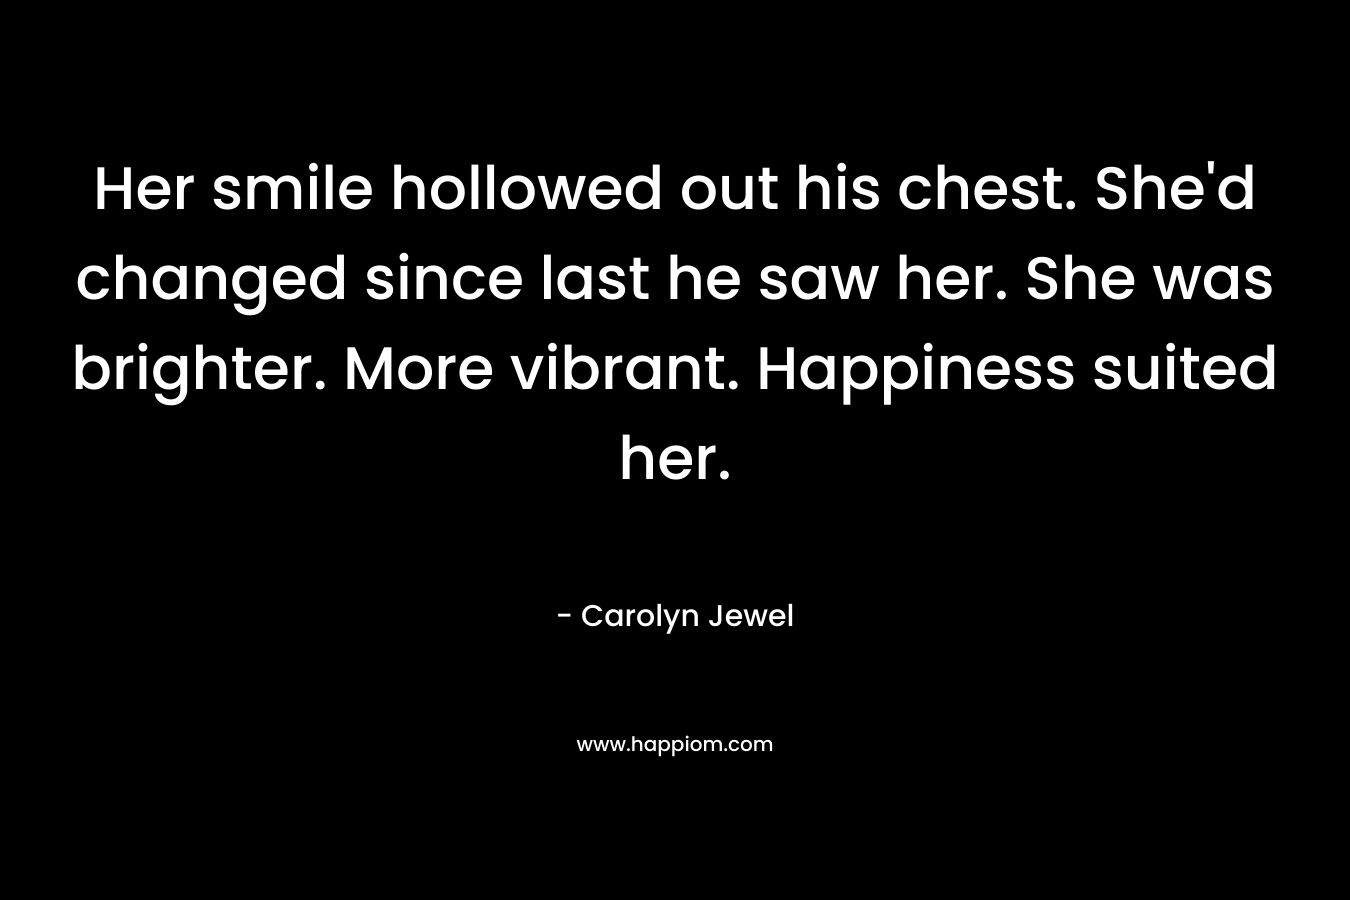 Her smile hollowed out his chest. She’d changed since last he saw her. She was brighter. More vibrant. Happiness suited her. – Carolyn Jewel